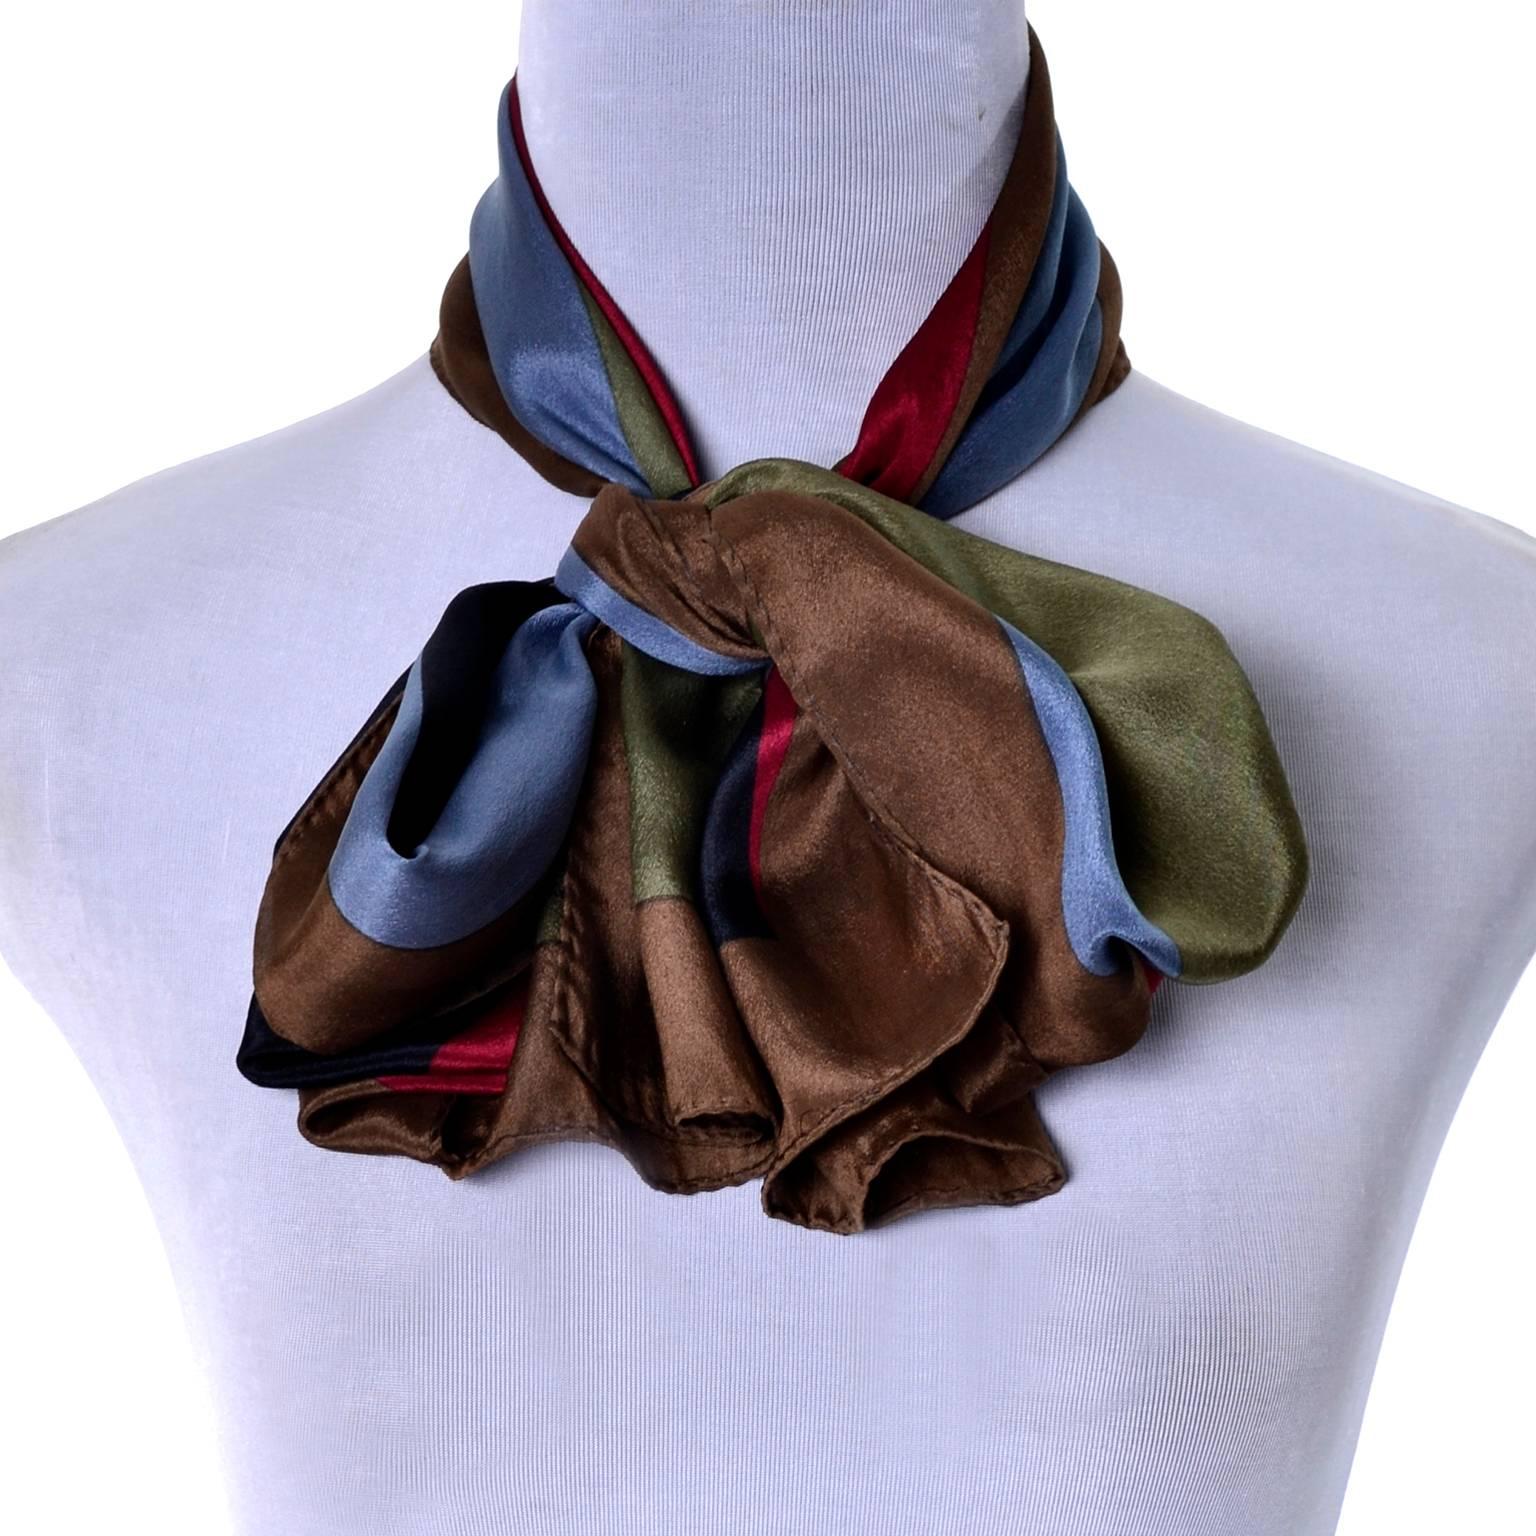 This vintage silk scarf from Kenzo has brown, green, sky blue, navy blue and red geometric shapes.  The scarf measures 58 by 10 inches and is in excellent condition! We love vintage Kenzo pieces and the color blocking triangles in this scarf make it